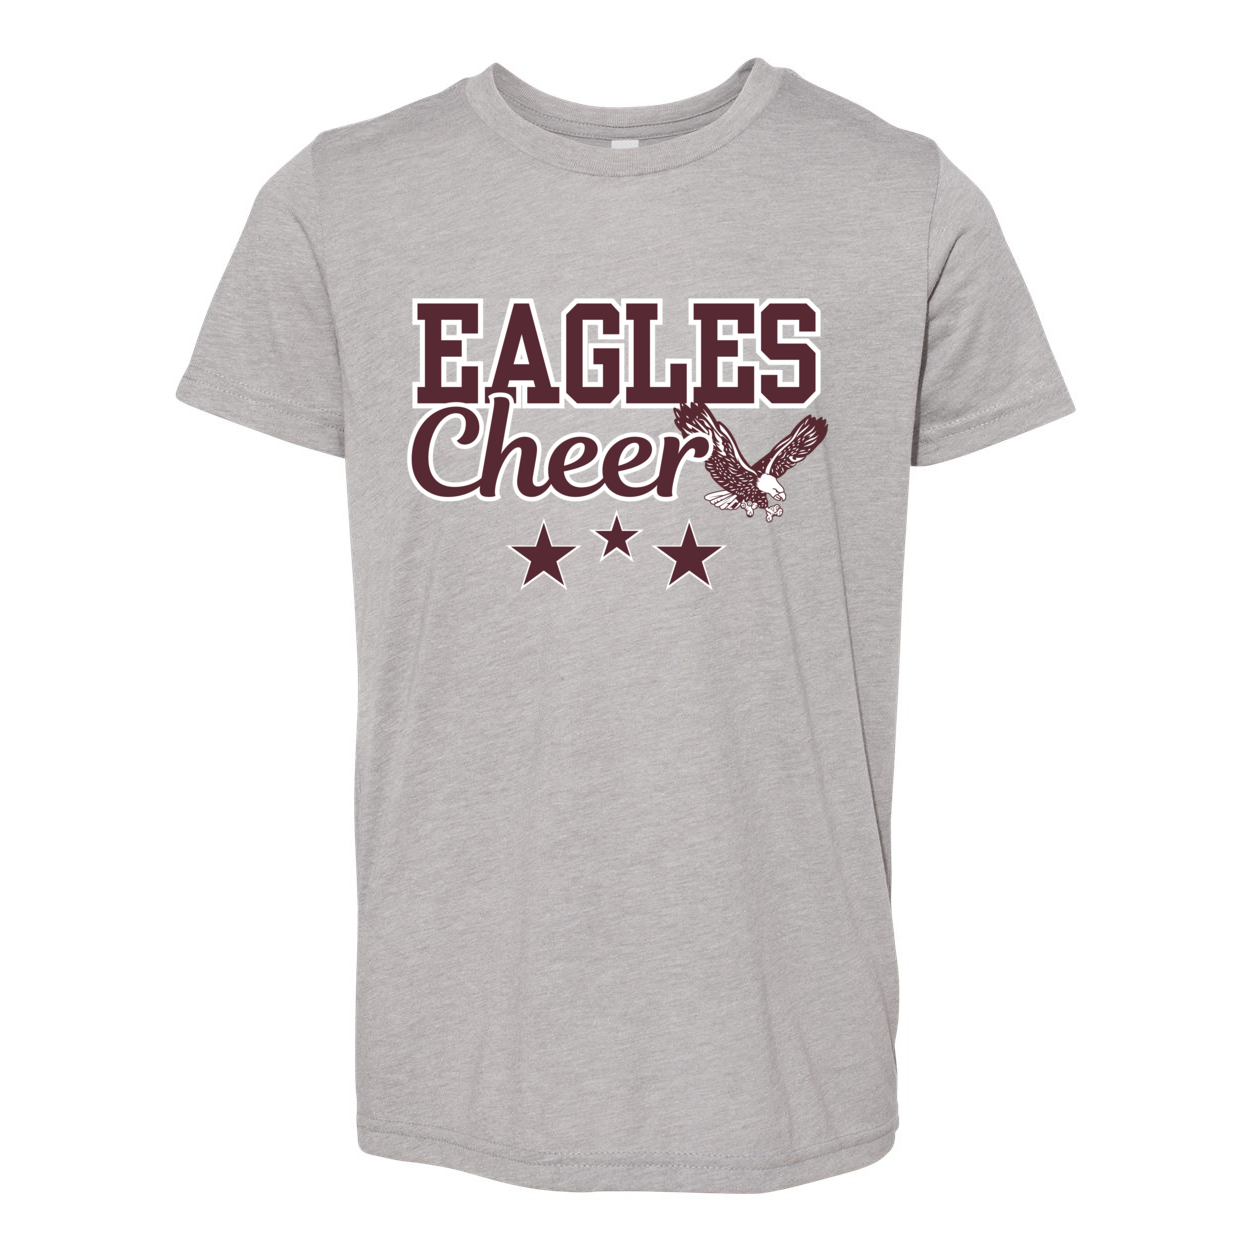 Youth Super Soft Victory Cheer with Back Graphic Short Sleeve Tee - New Albany Eagles